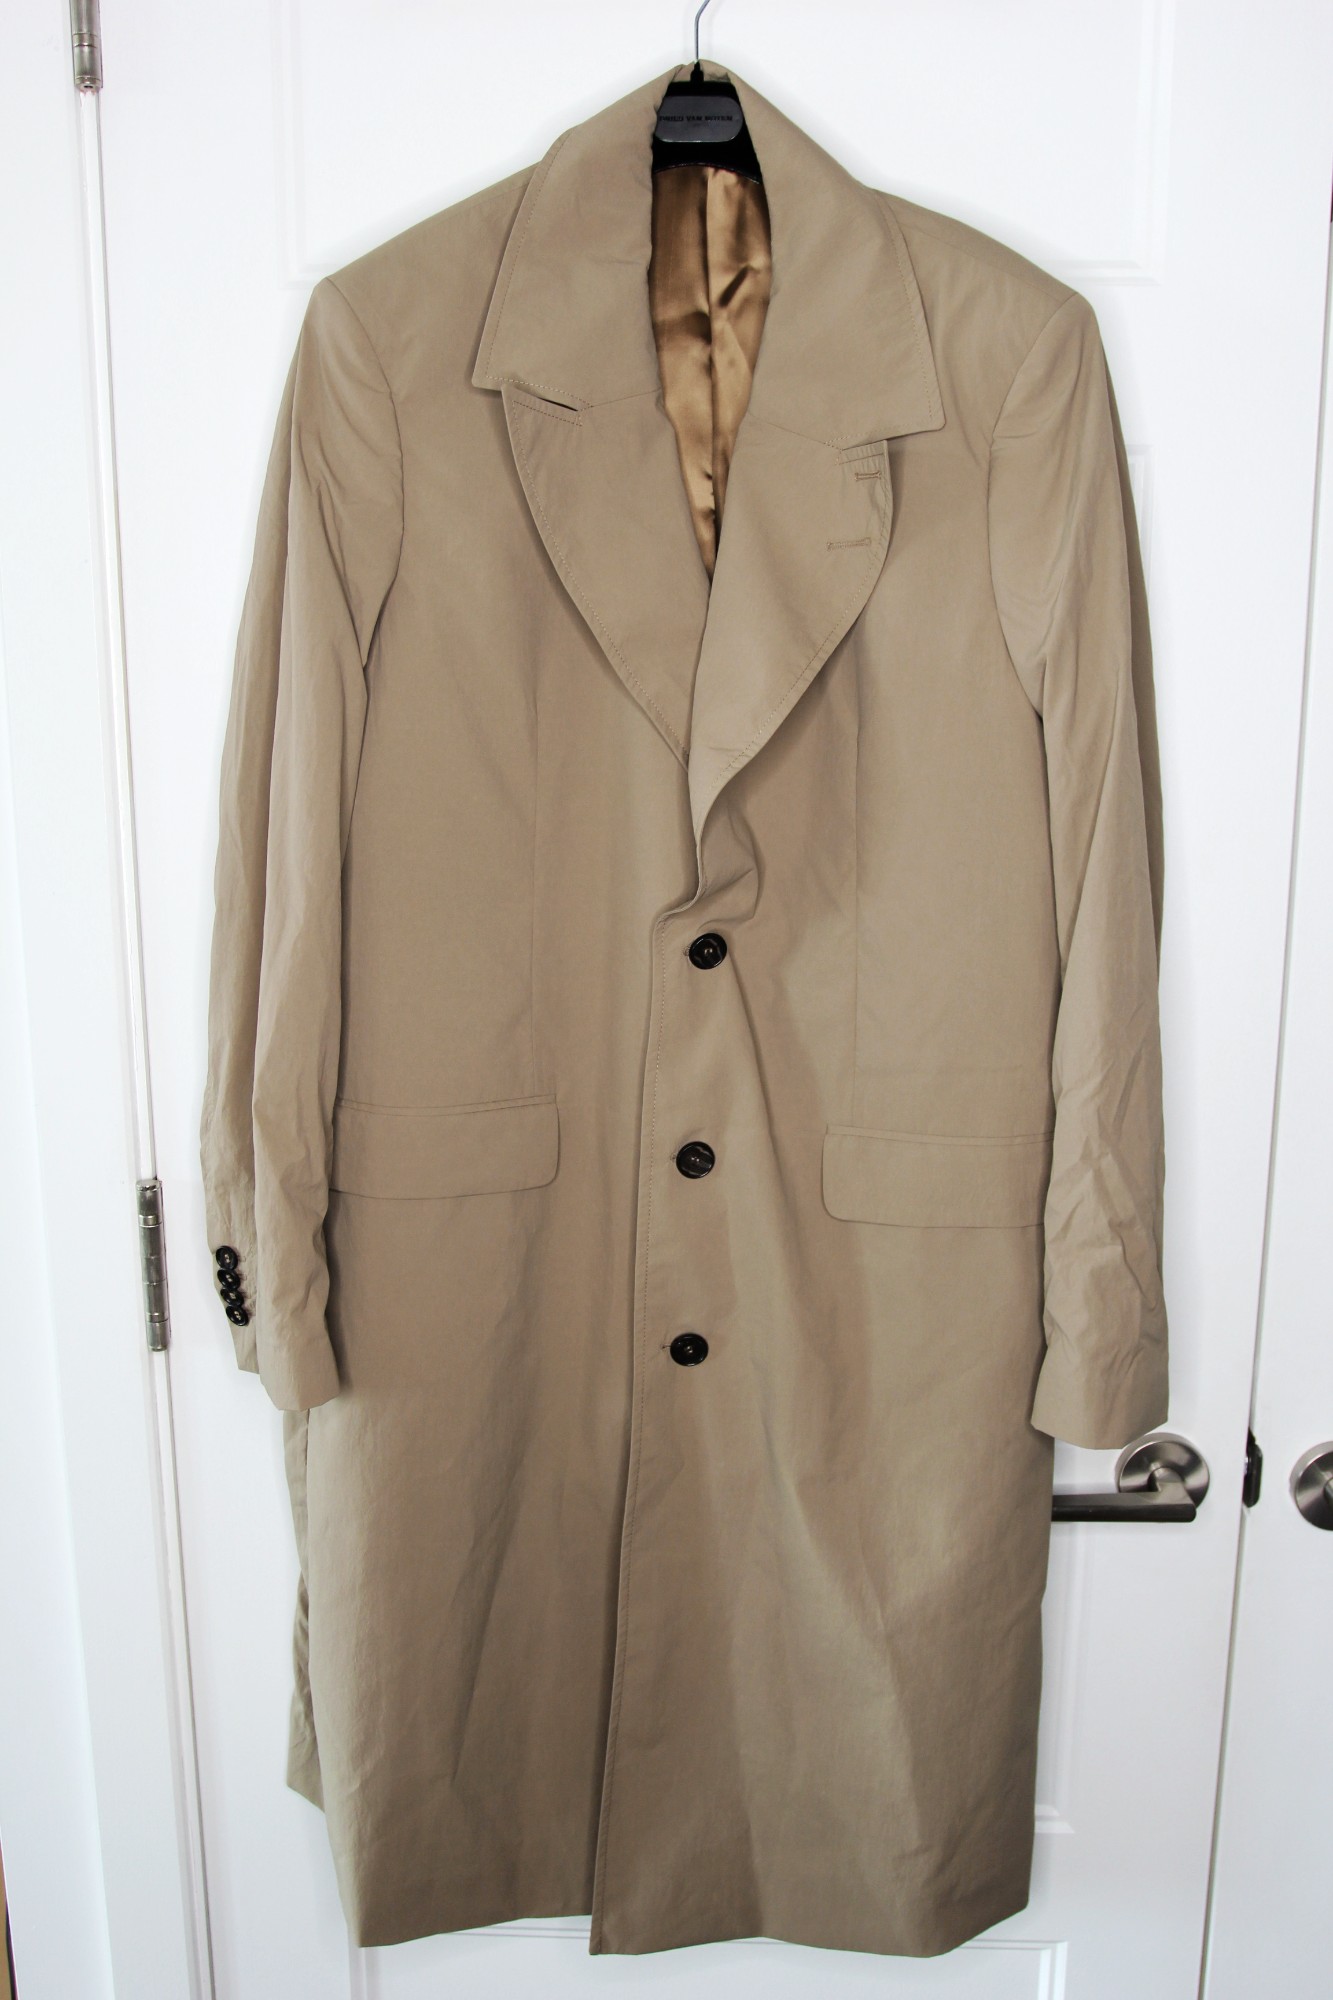 BNWT SS23 TIGER OF SWEDEN LONG TRENCH COAT 54 - 2